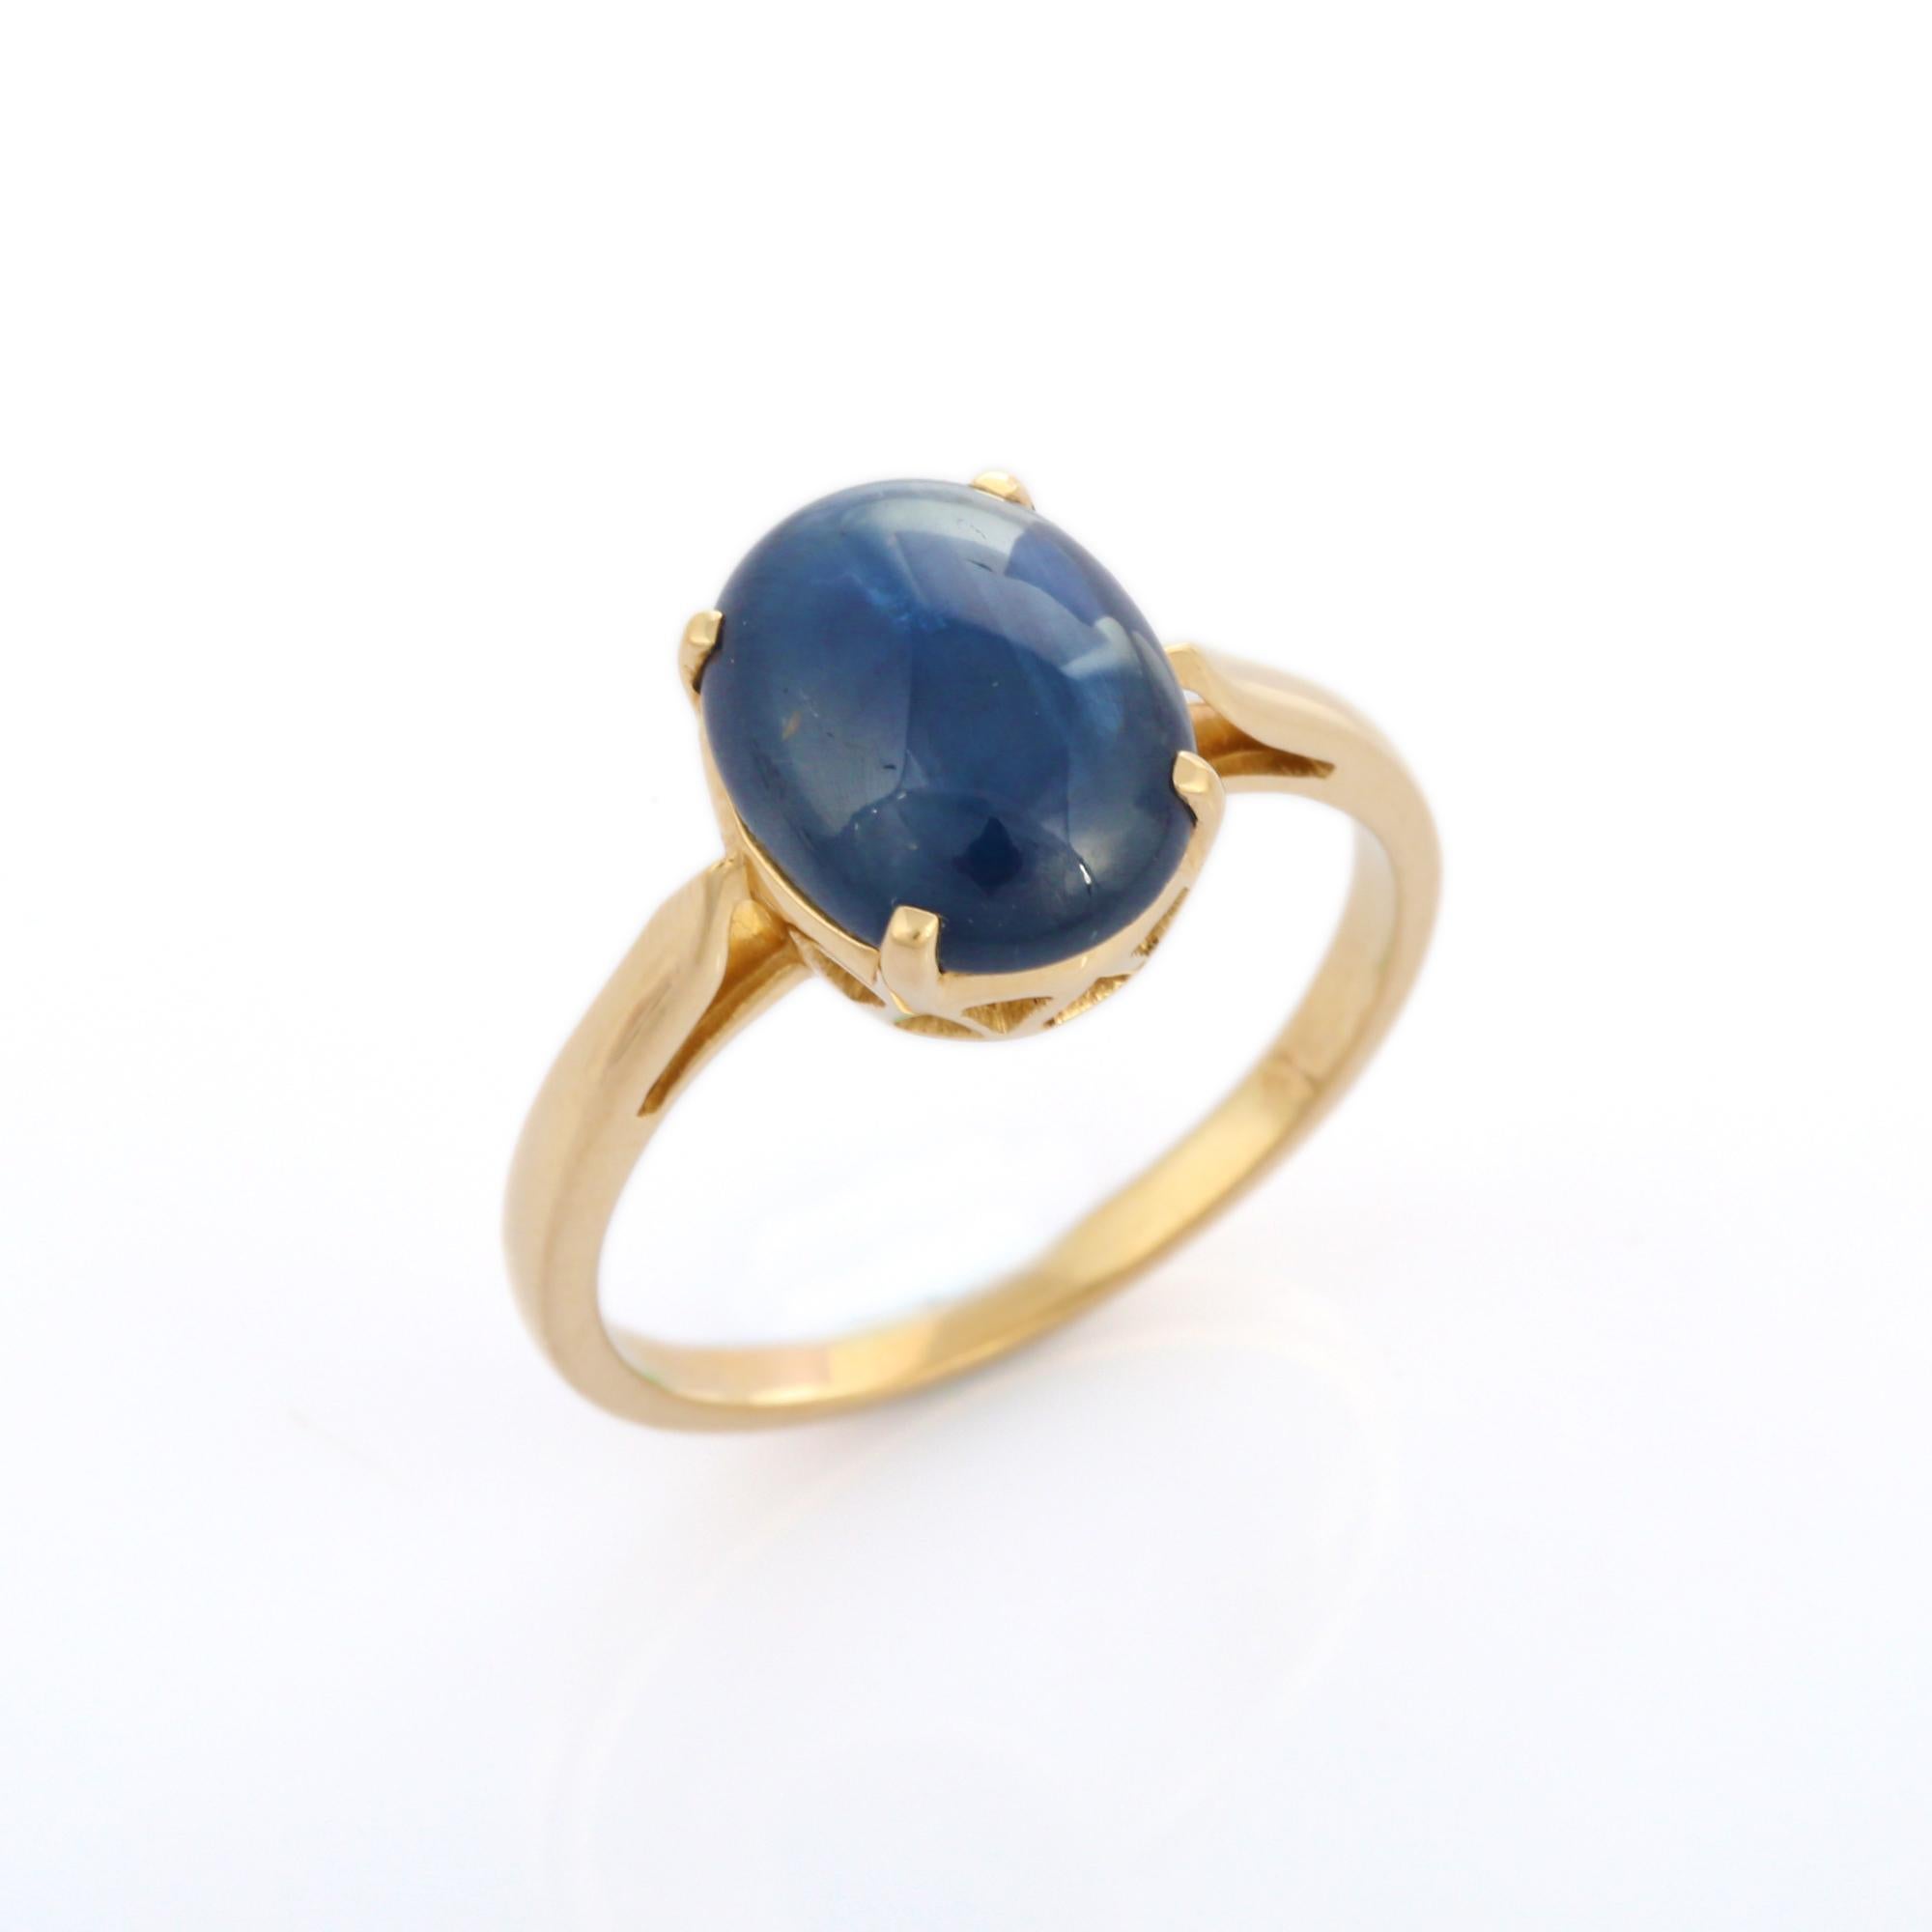 For Sale:  4.33 Carat Blue Sapphire Big Gemstone Ring in 14K Yellow Gold 7